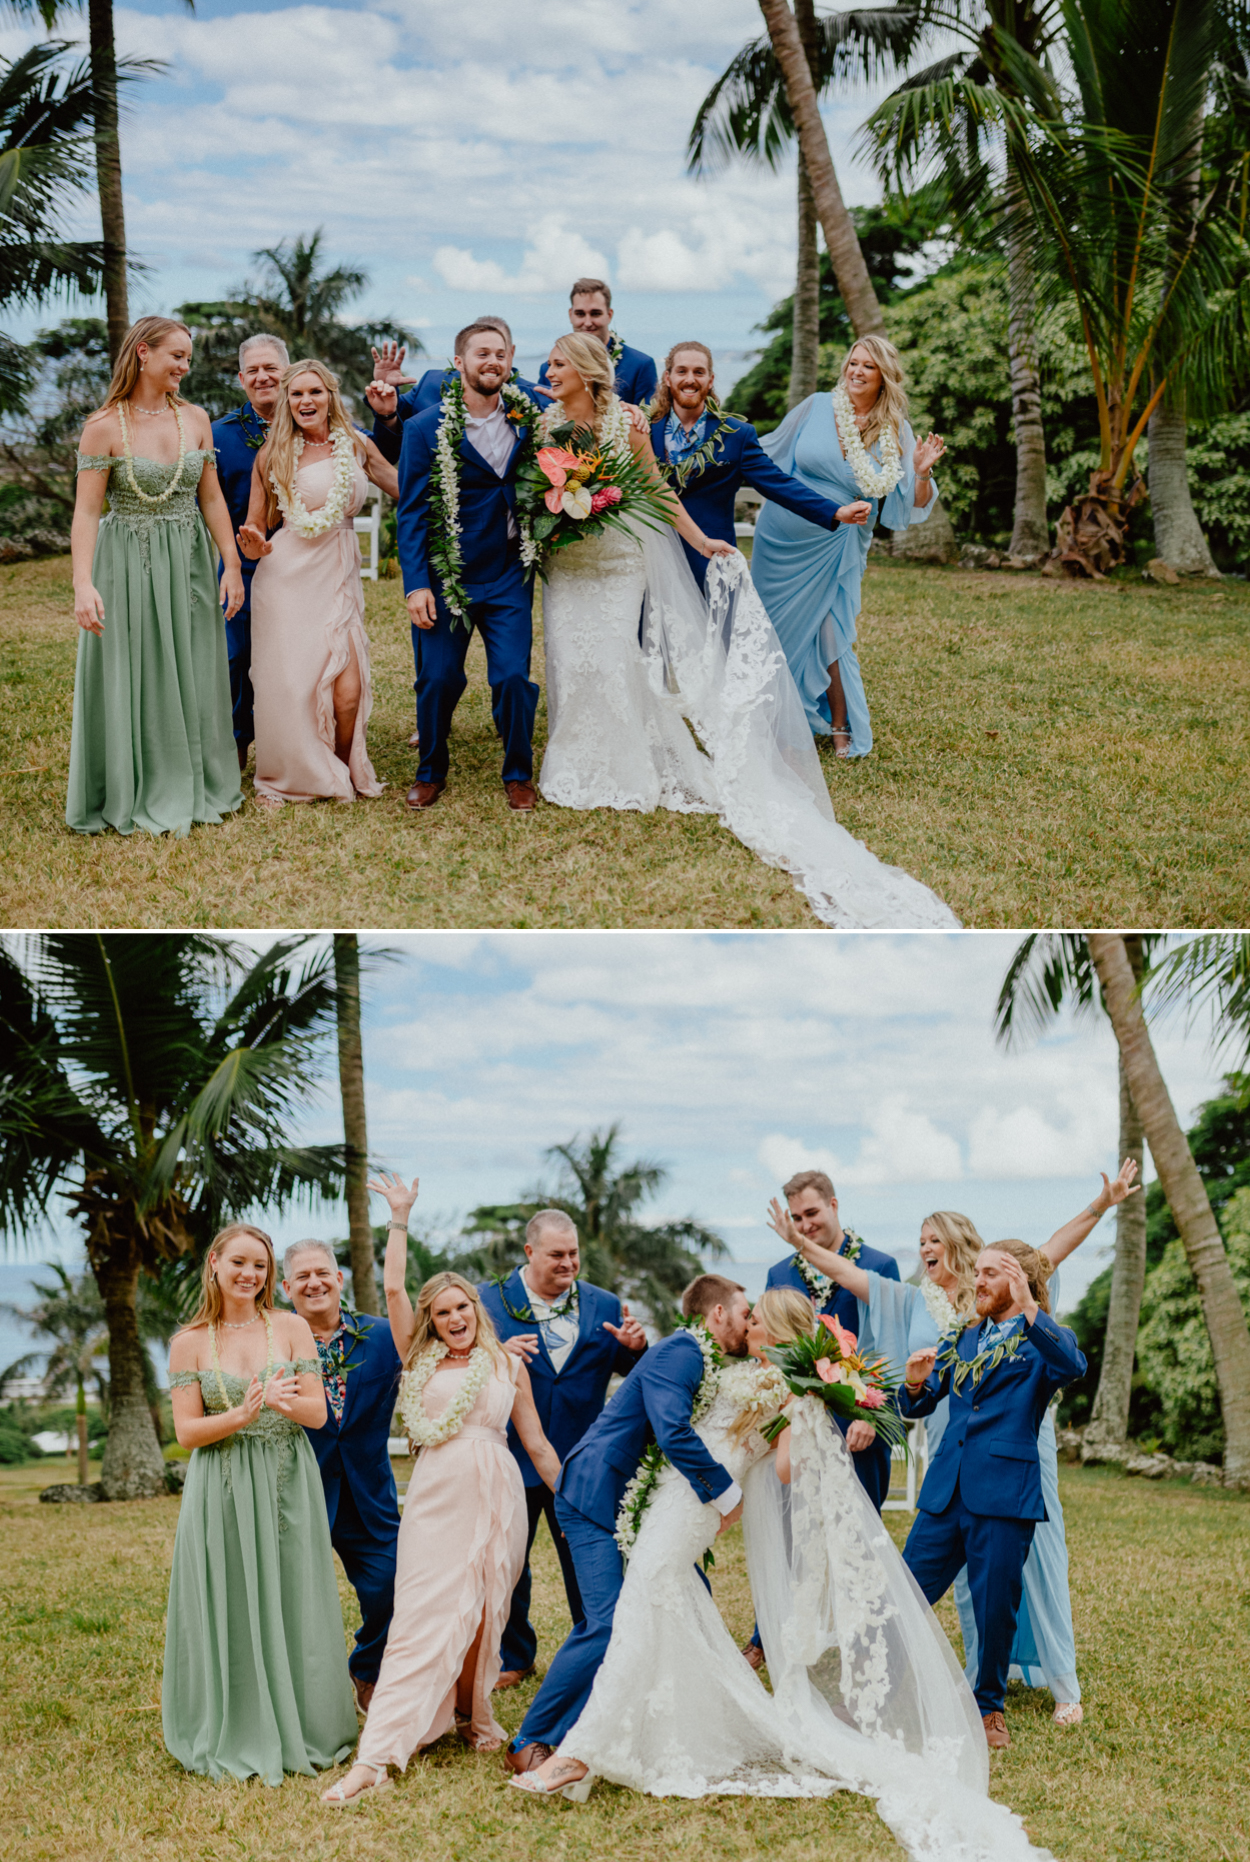 Bride, Groom, and guests celebrating in Paliku Gardens Venue at Kualoa Ranch wedding with Chinaman's hat background